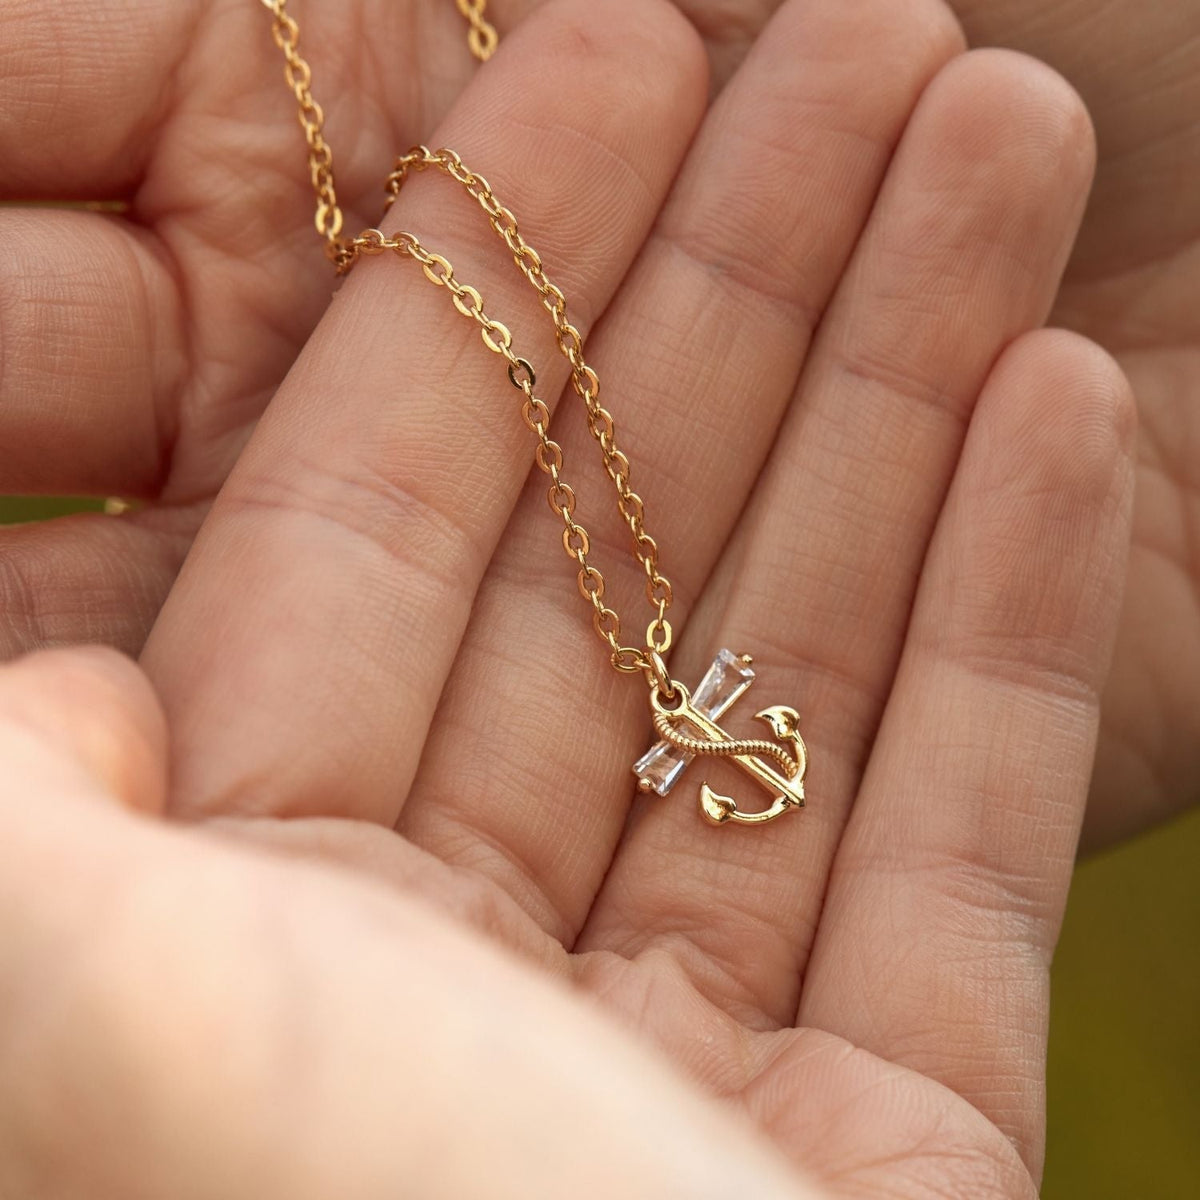 To the Mother of My Groom (From Bride) | First Breath | Anchor Necklace